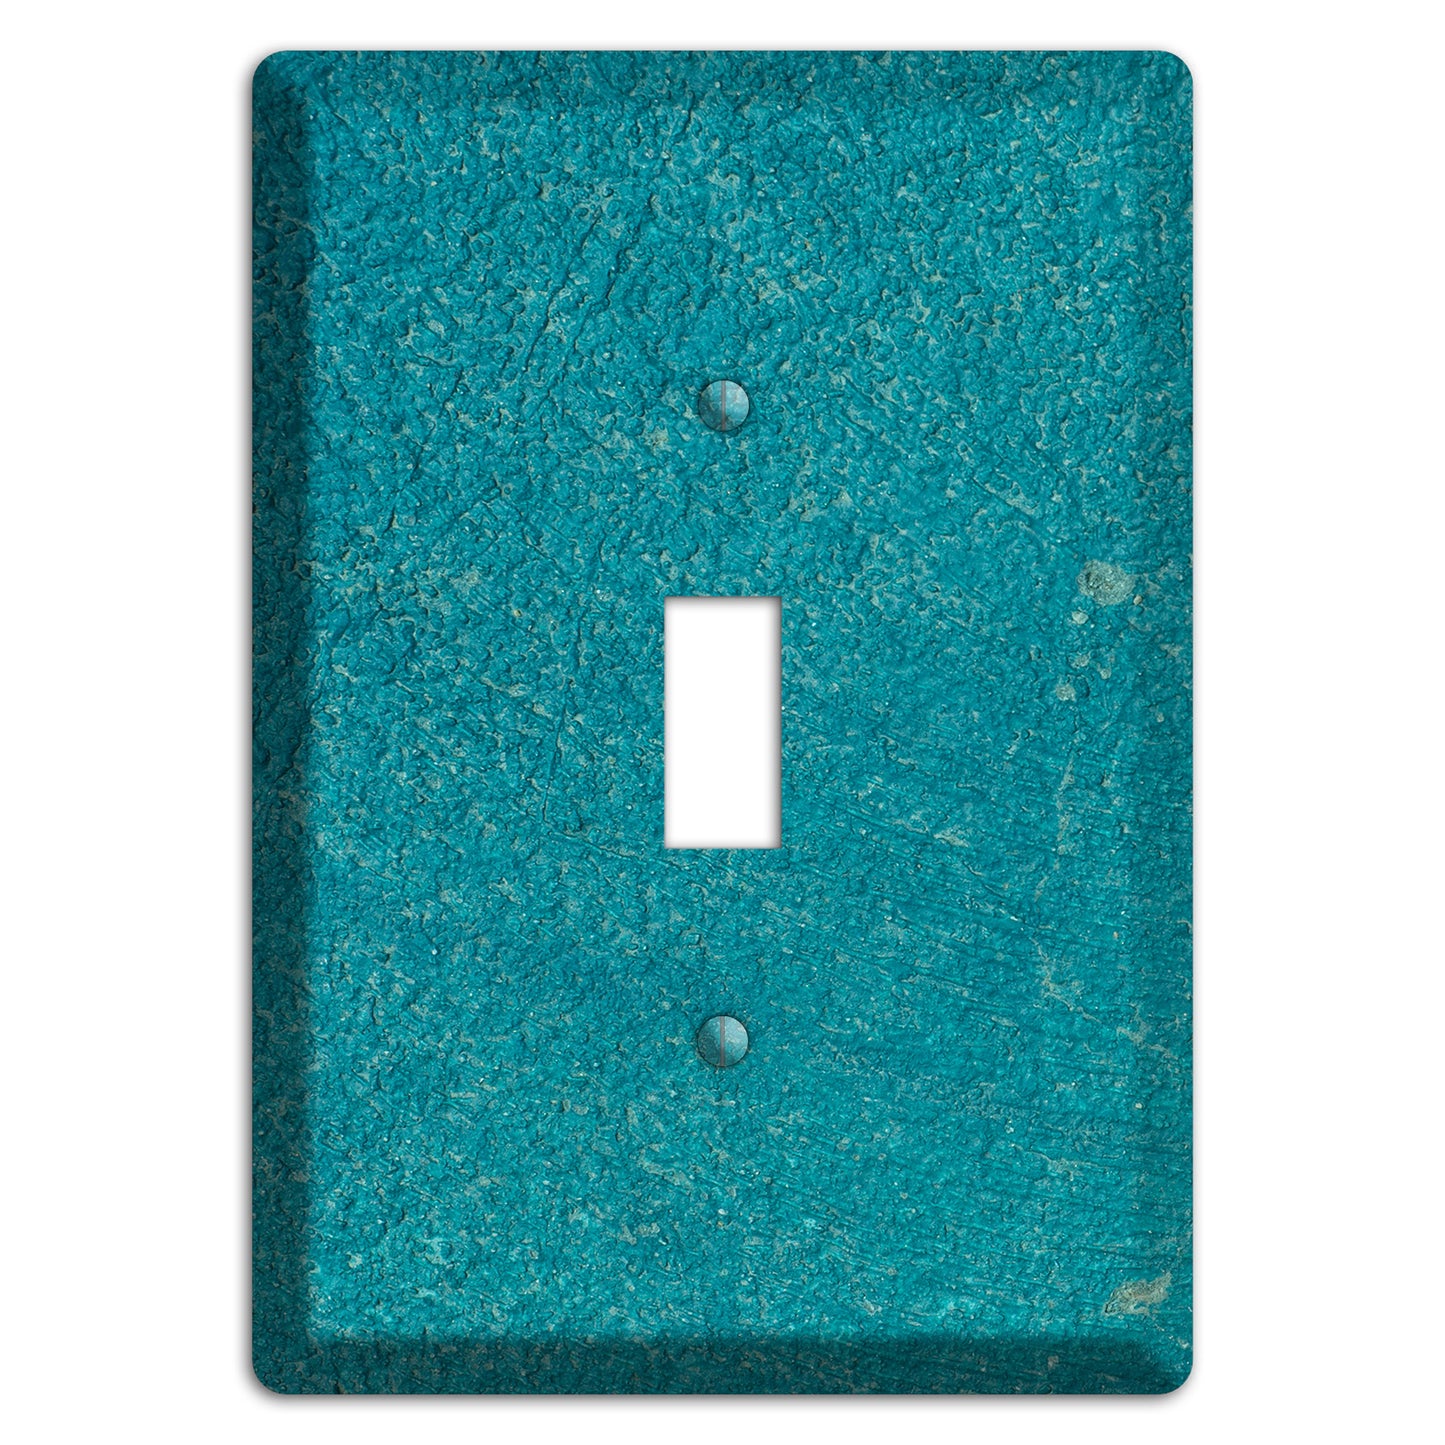 Teal concrete Cover Plates